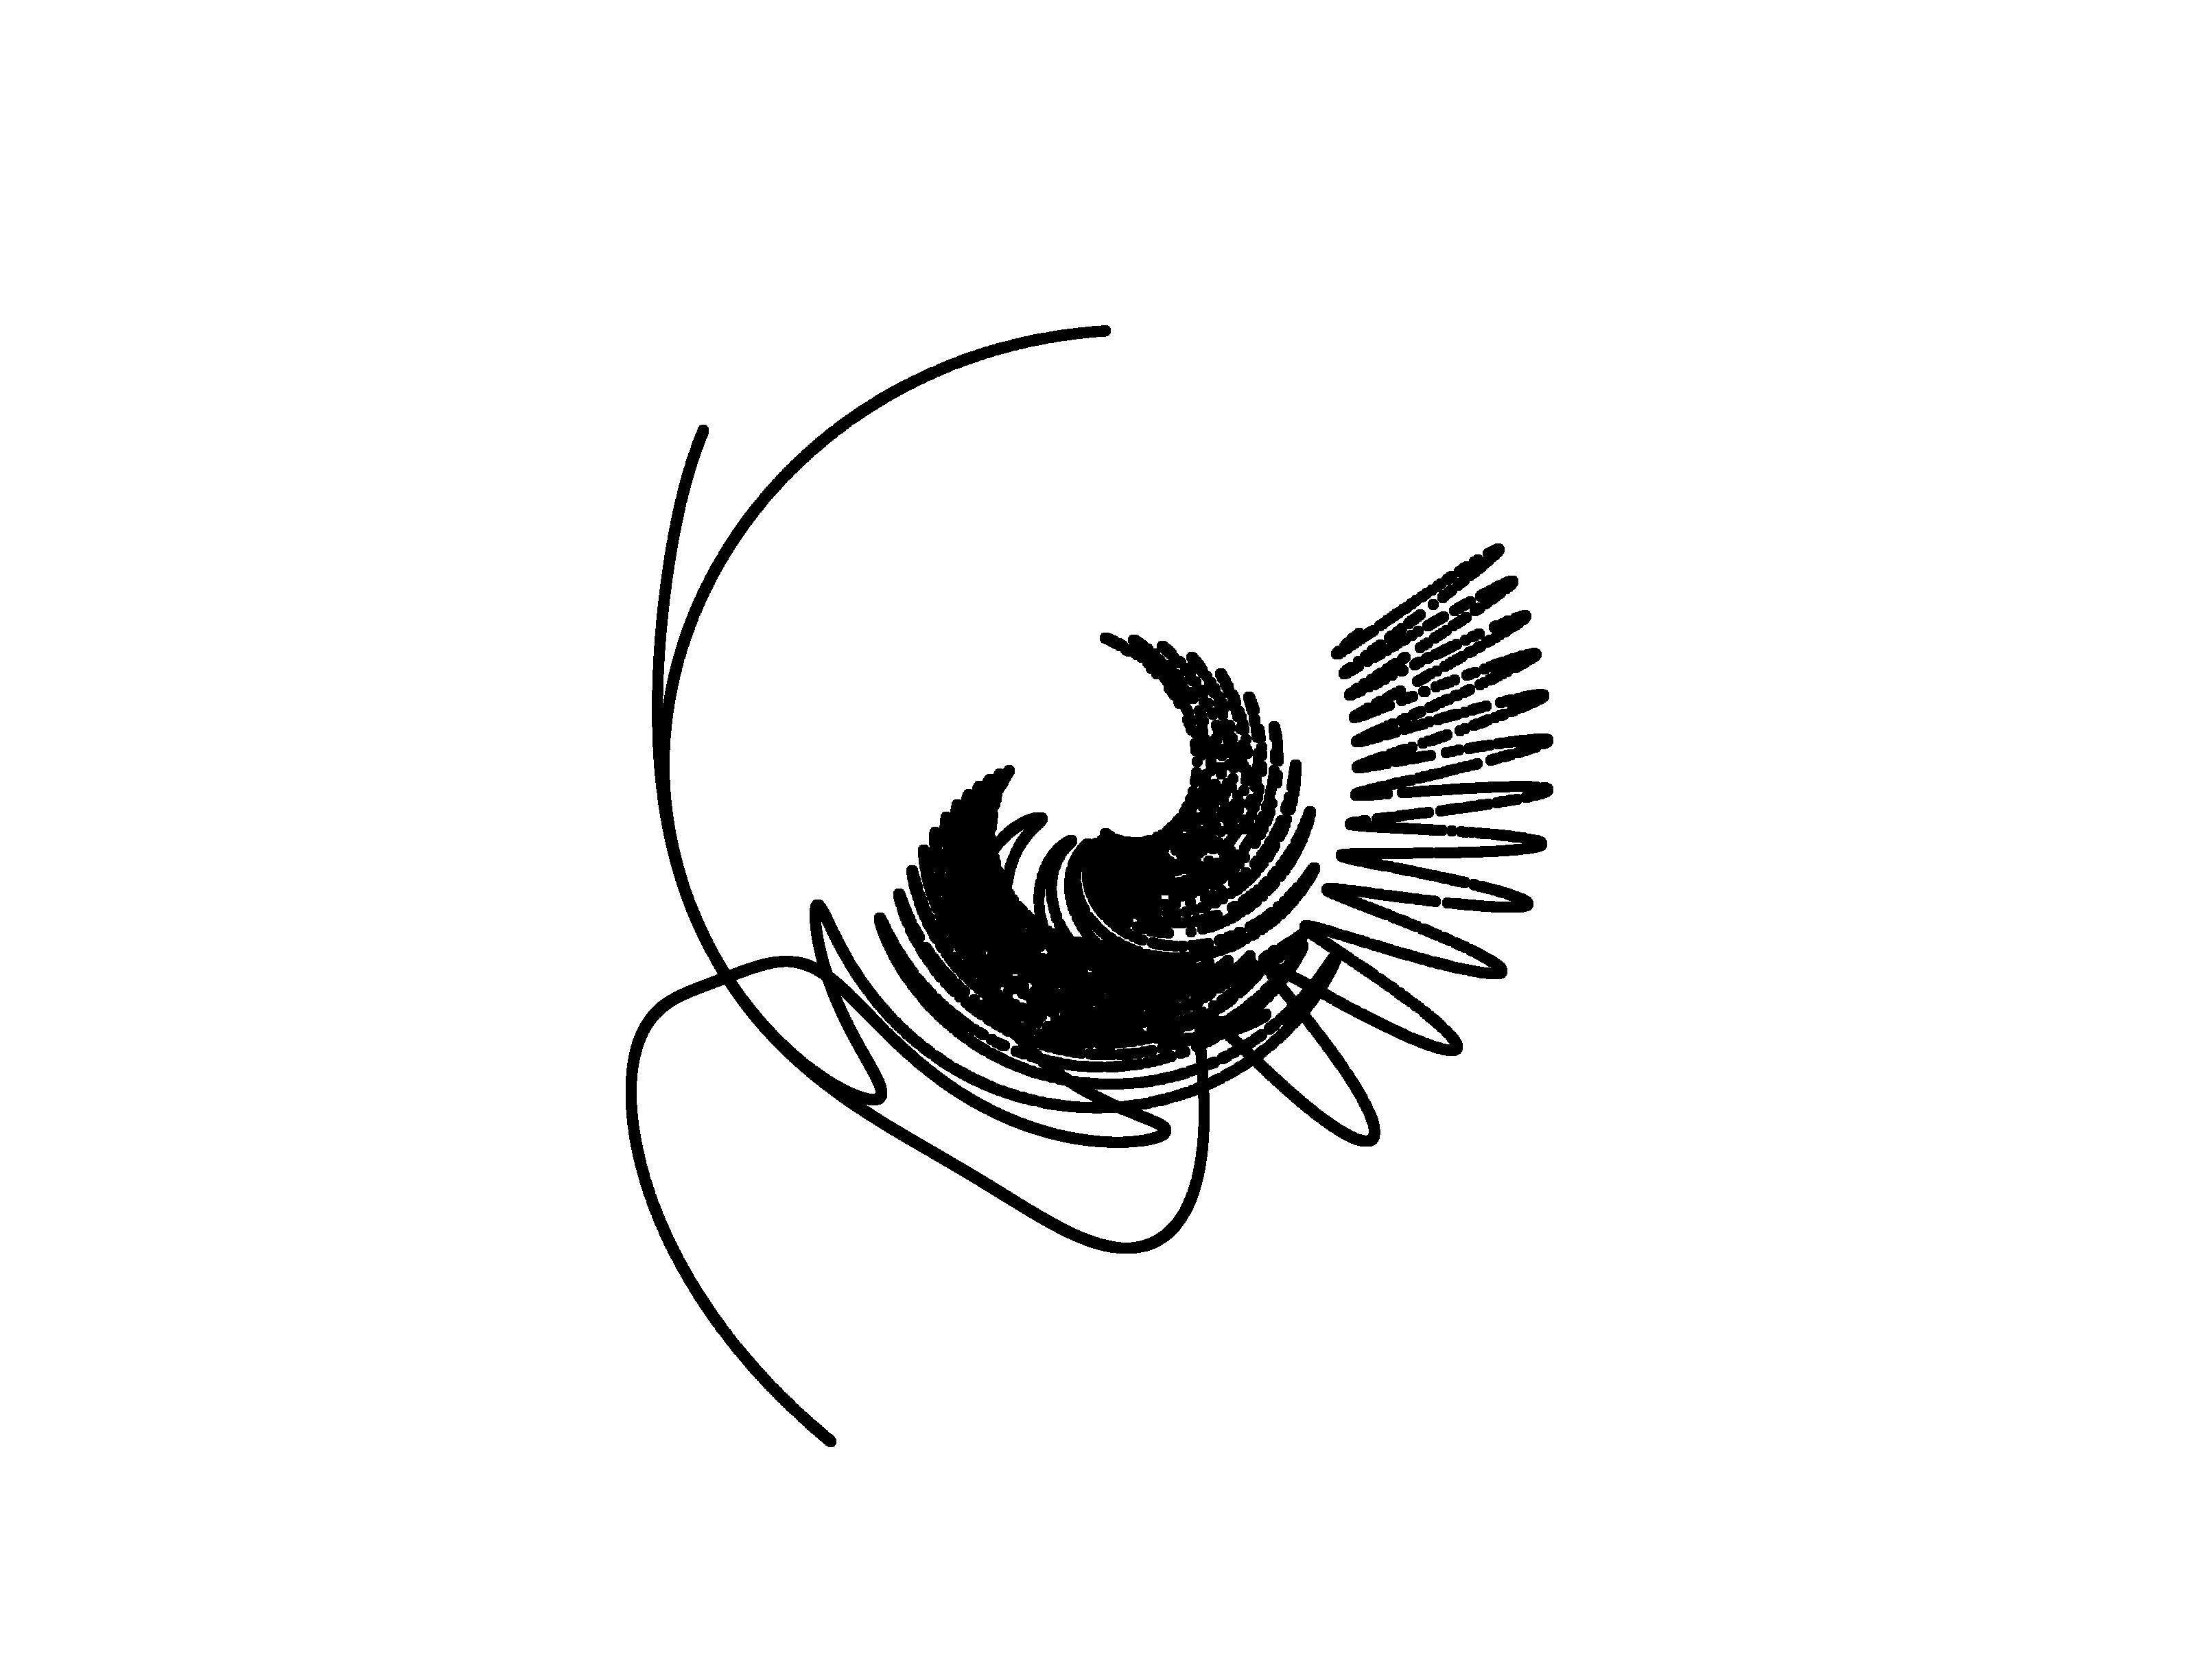 Black squiggles made up of three equations on a white background